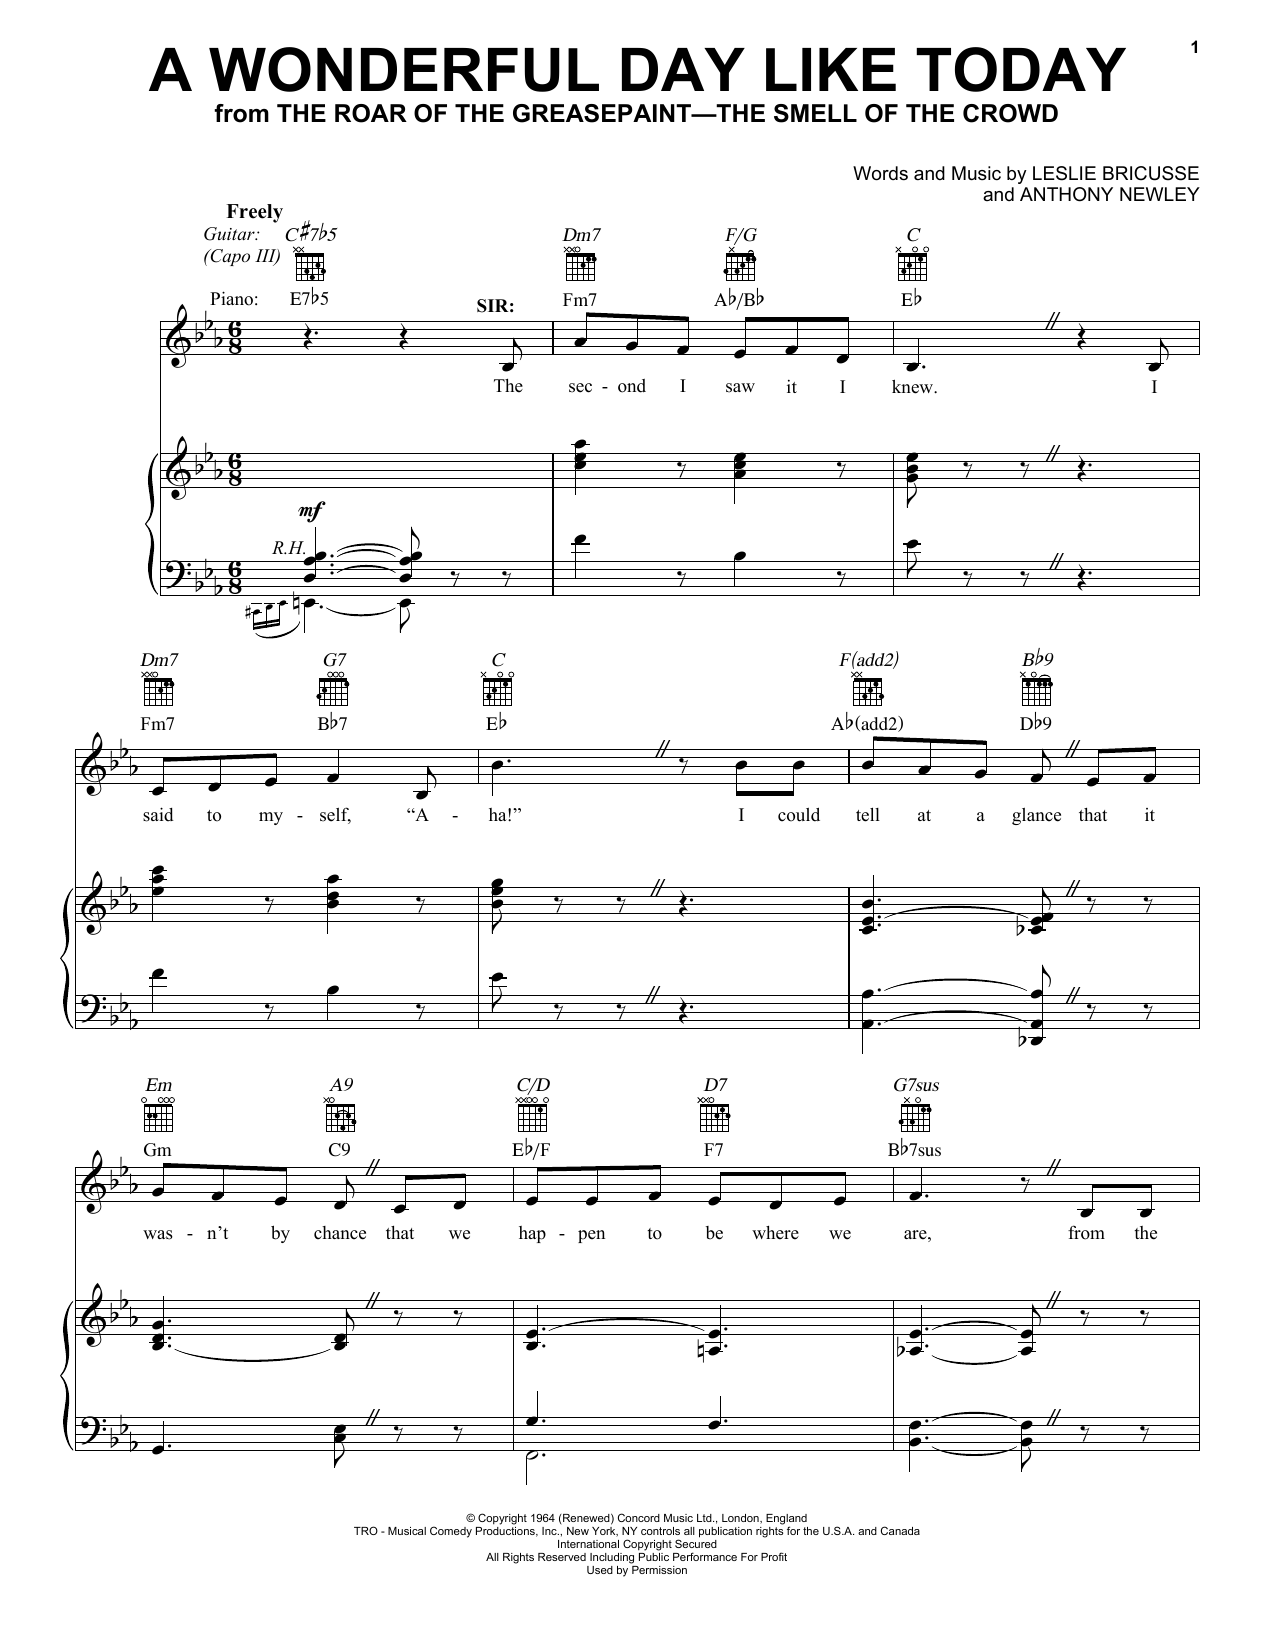 Download Leslie Bricusse A Wonderful Day Like Today Sheet Music